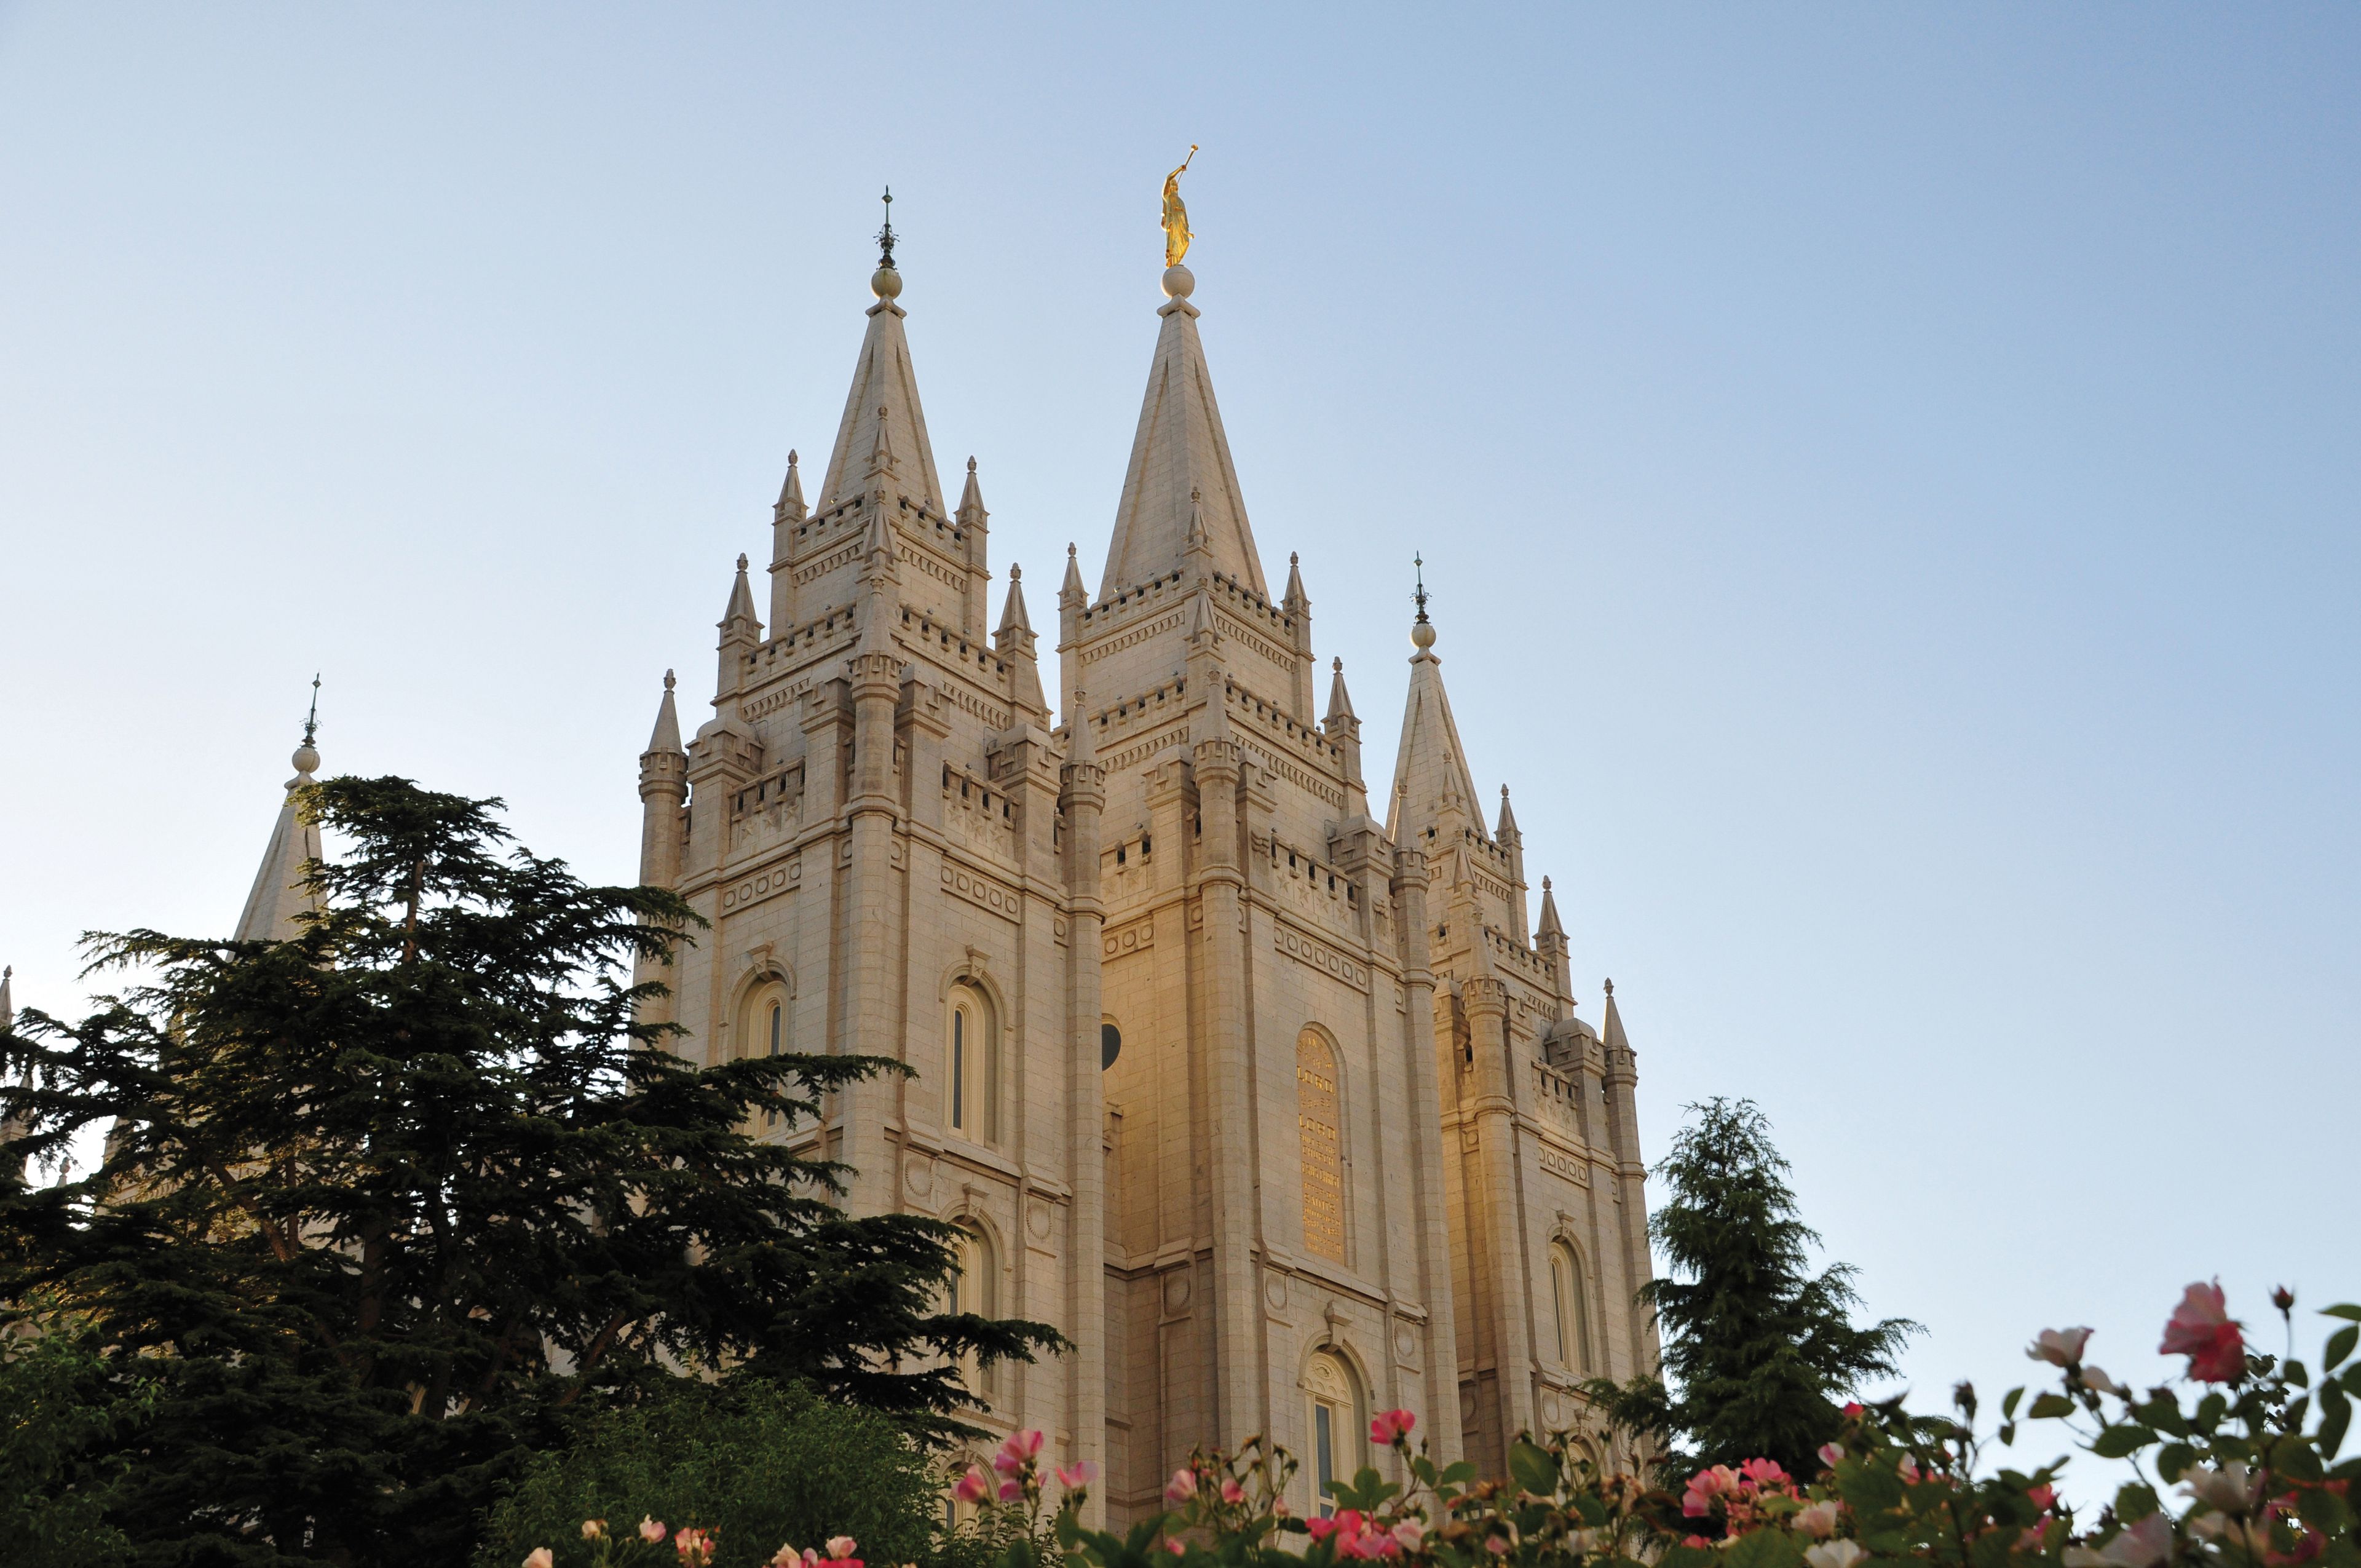 The Salt Lake Temple, including the spires and scenery.